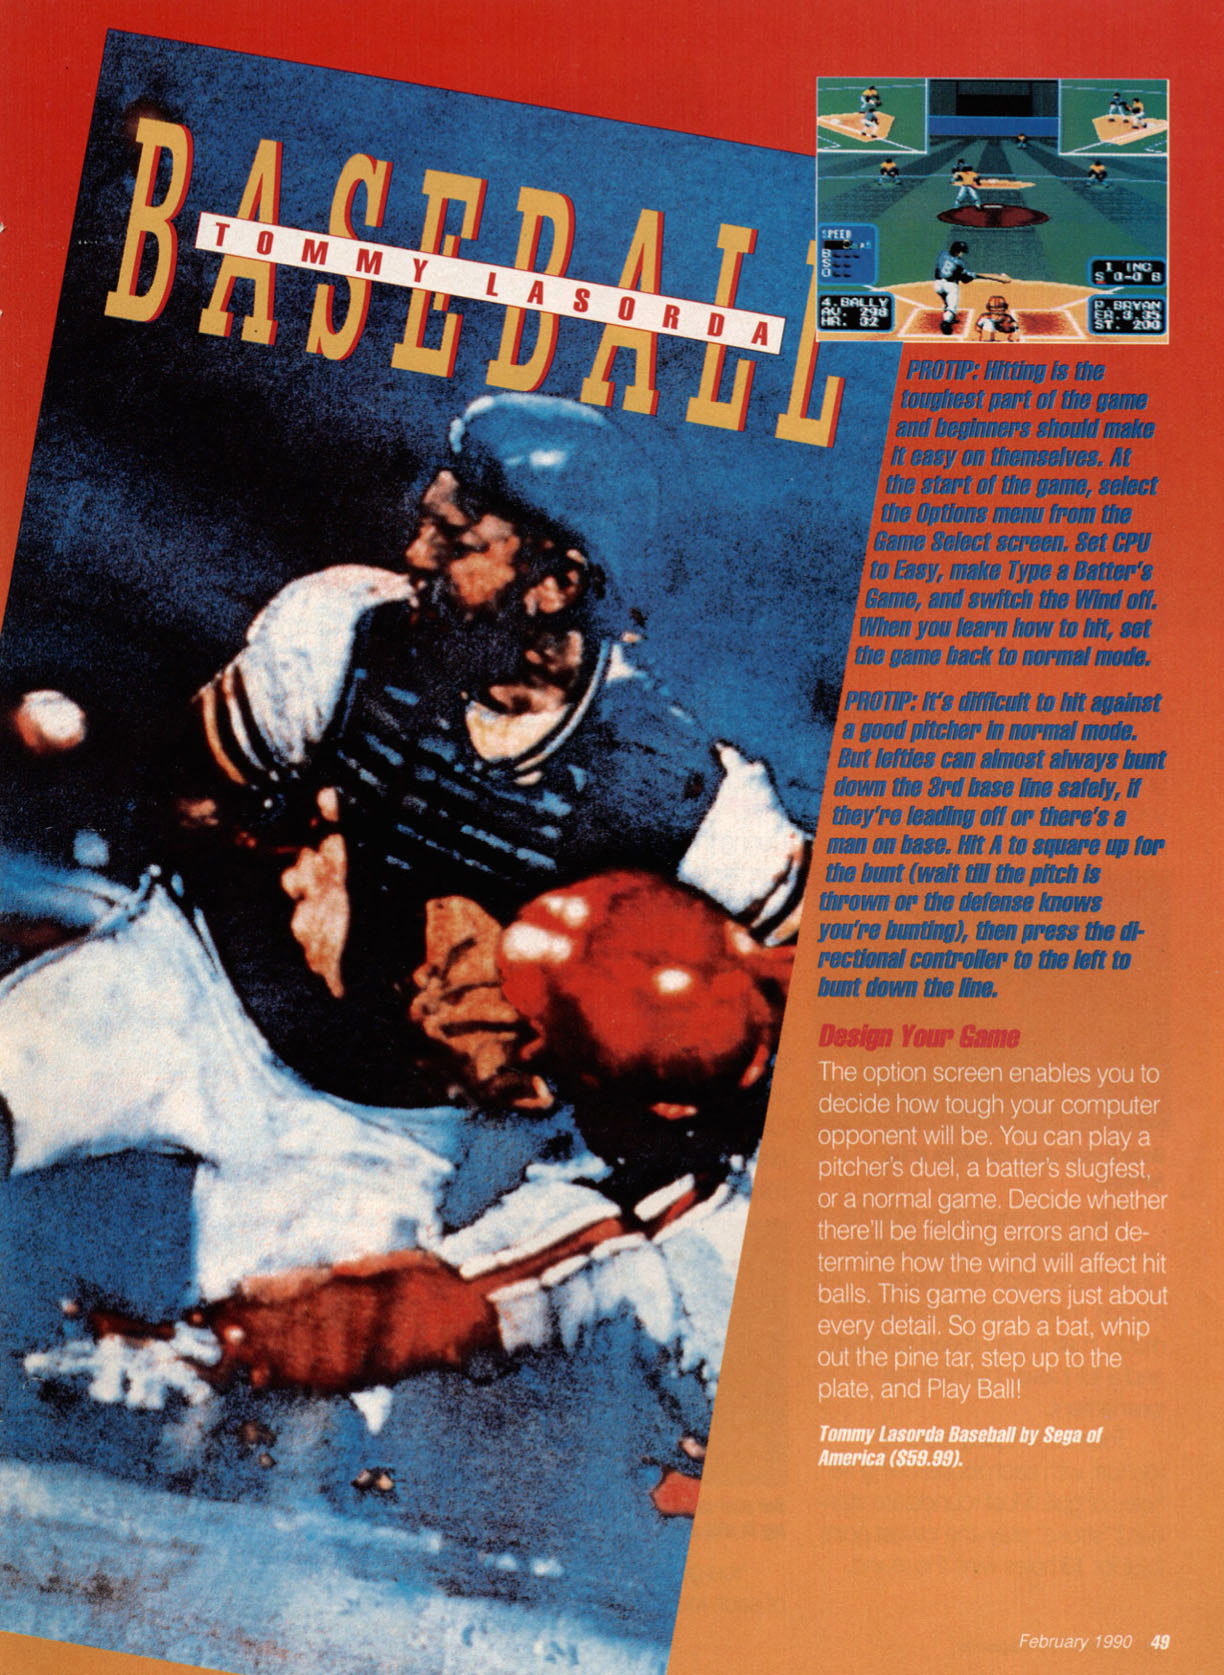 Tommy Lasorda Baseball Review, GamePro February 1990 page 49